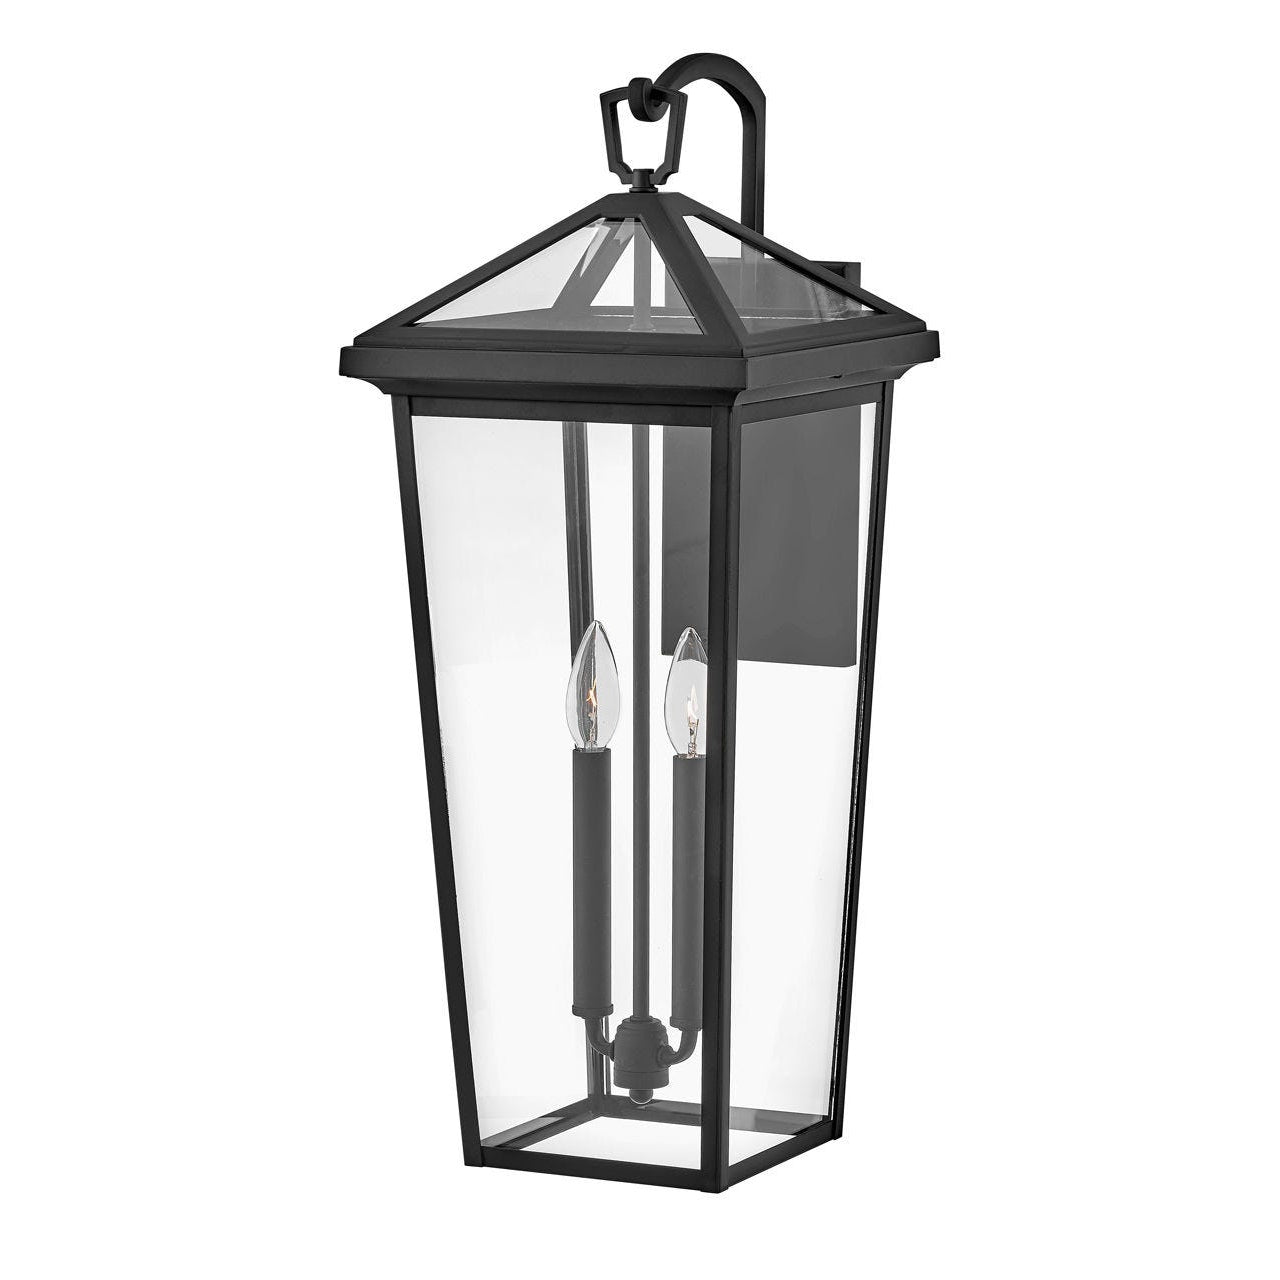 Hinkley Lighting, Alford Place Tall Wall Mount Lantern